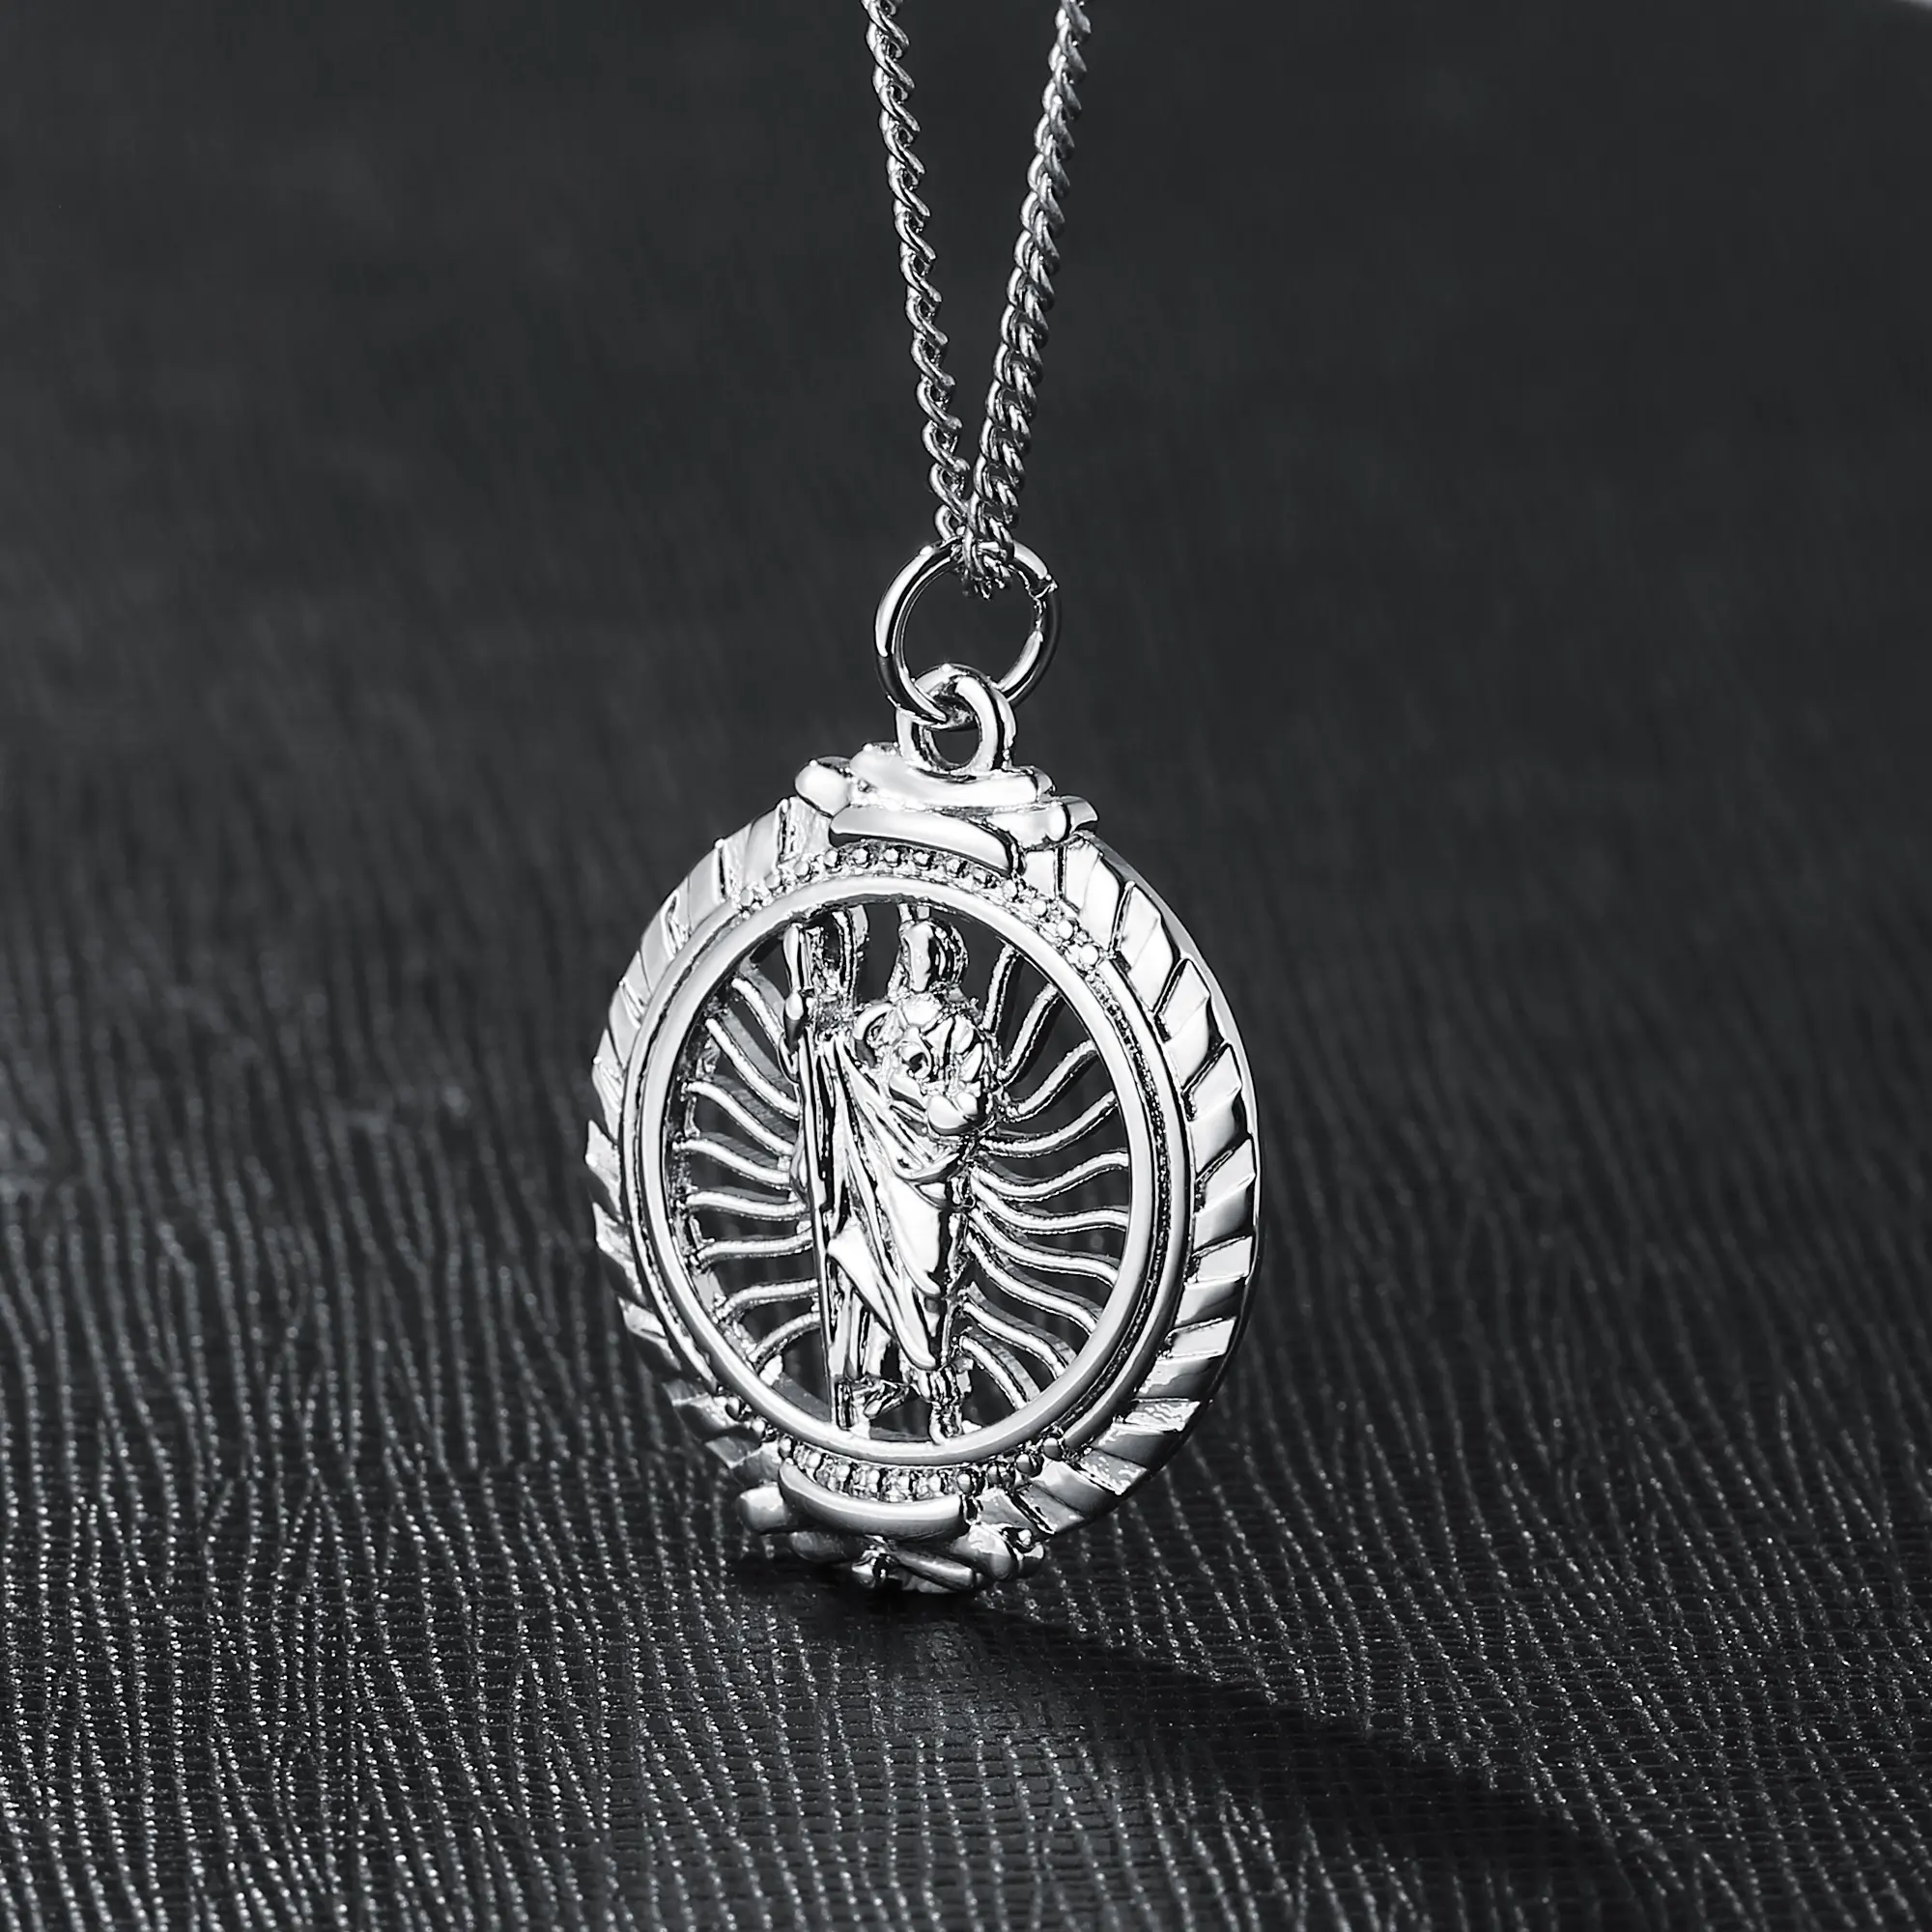 VANFI Jewelry Fashion Wholesale Necklace Charm Solid Saint Jude Virgin Mary 925 Sterling Silver Gold Pendant